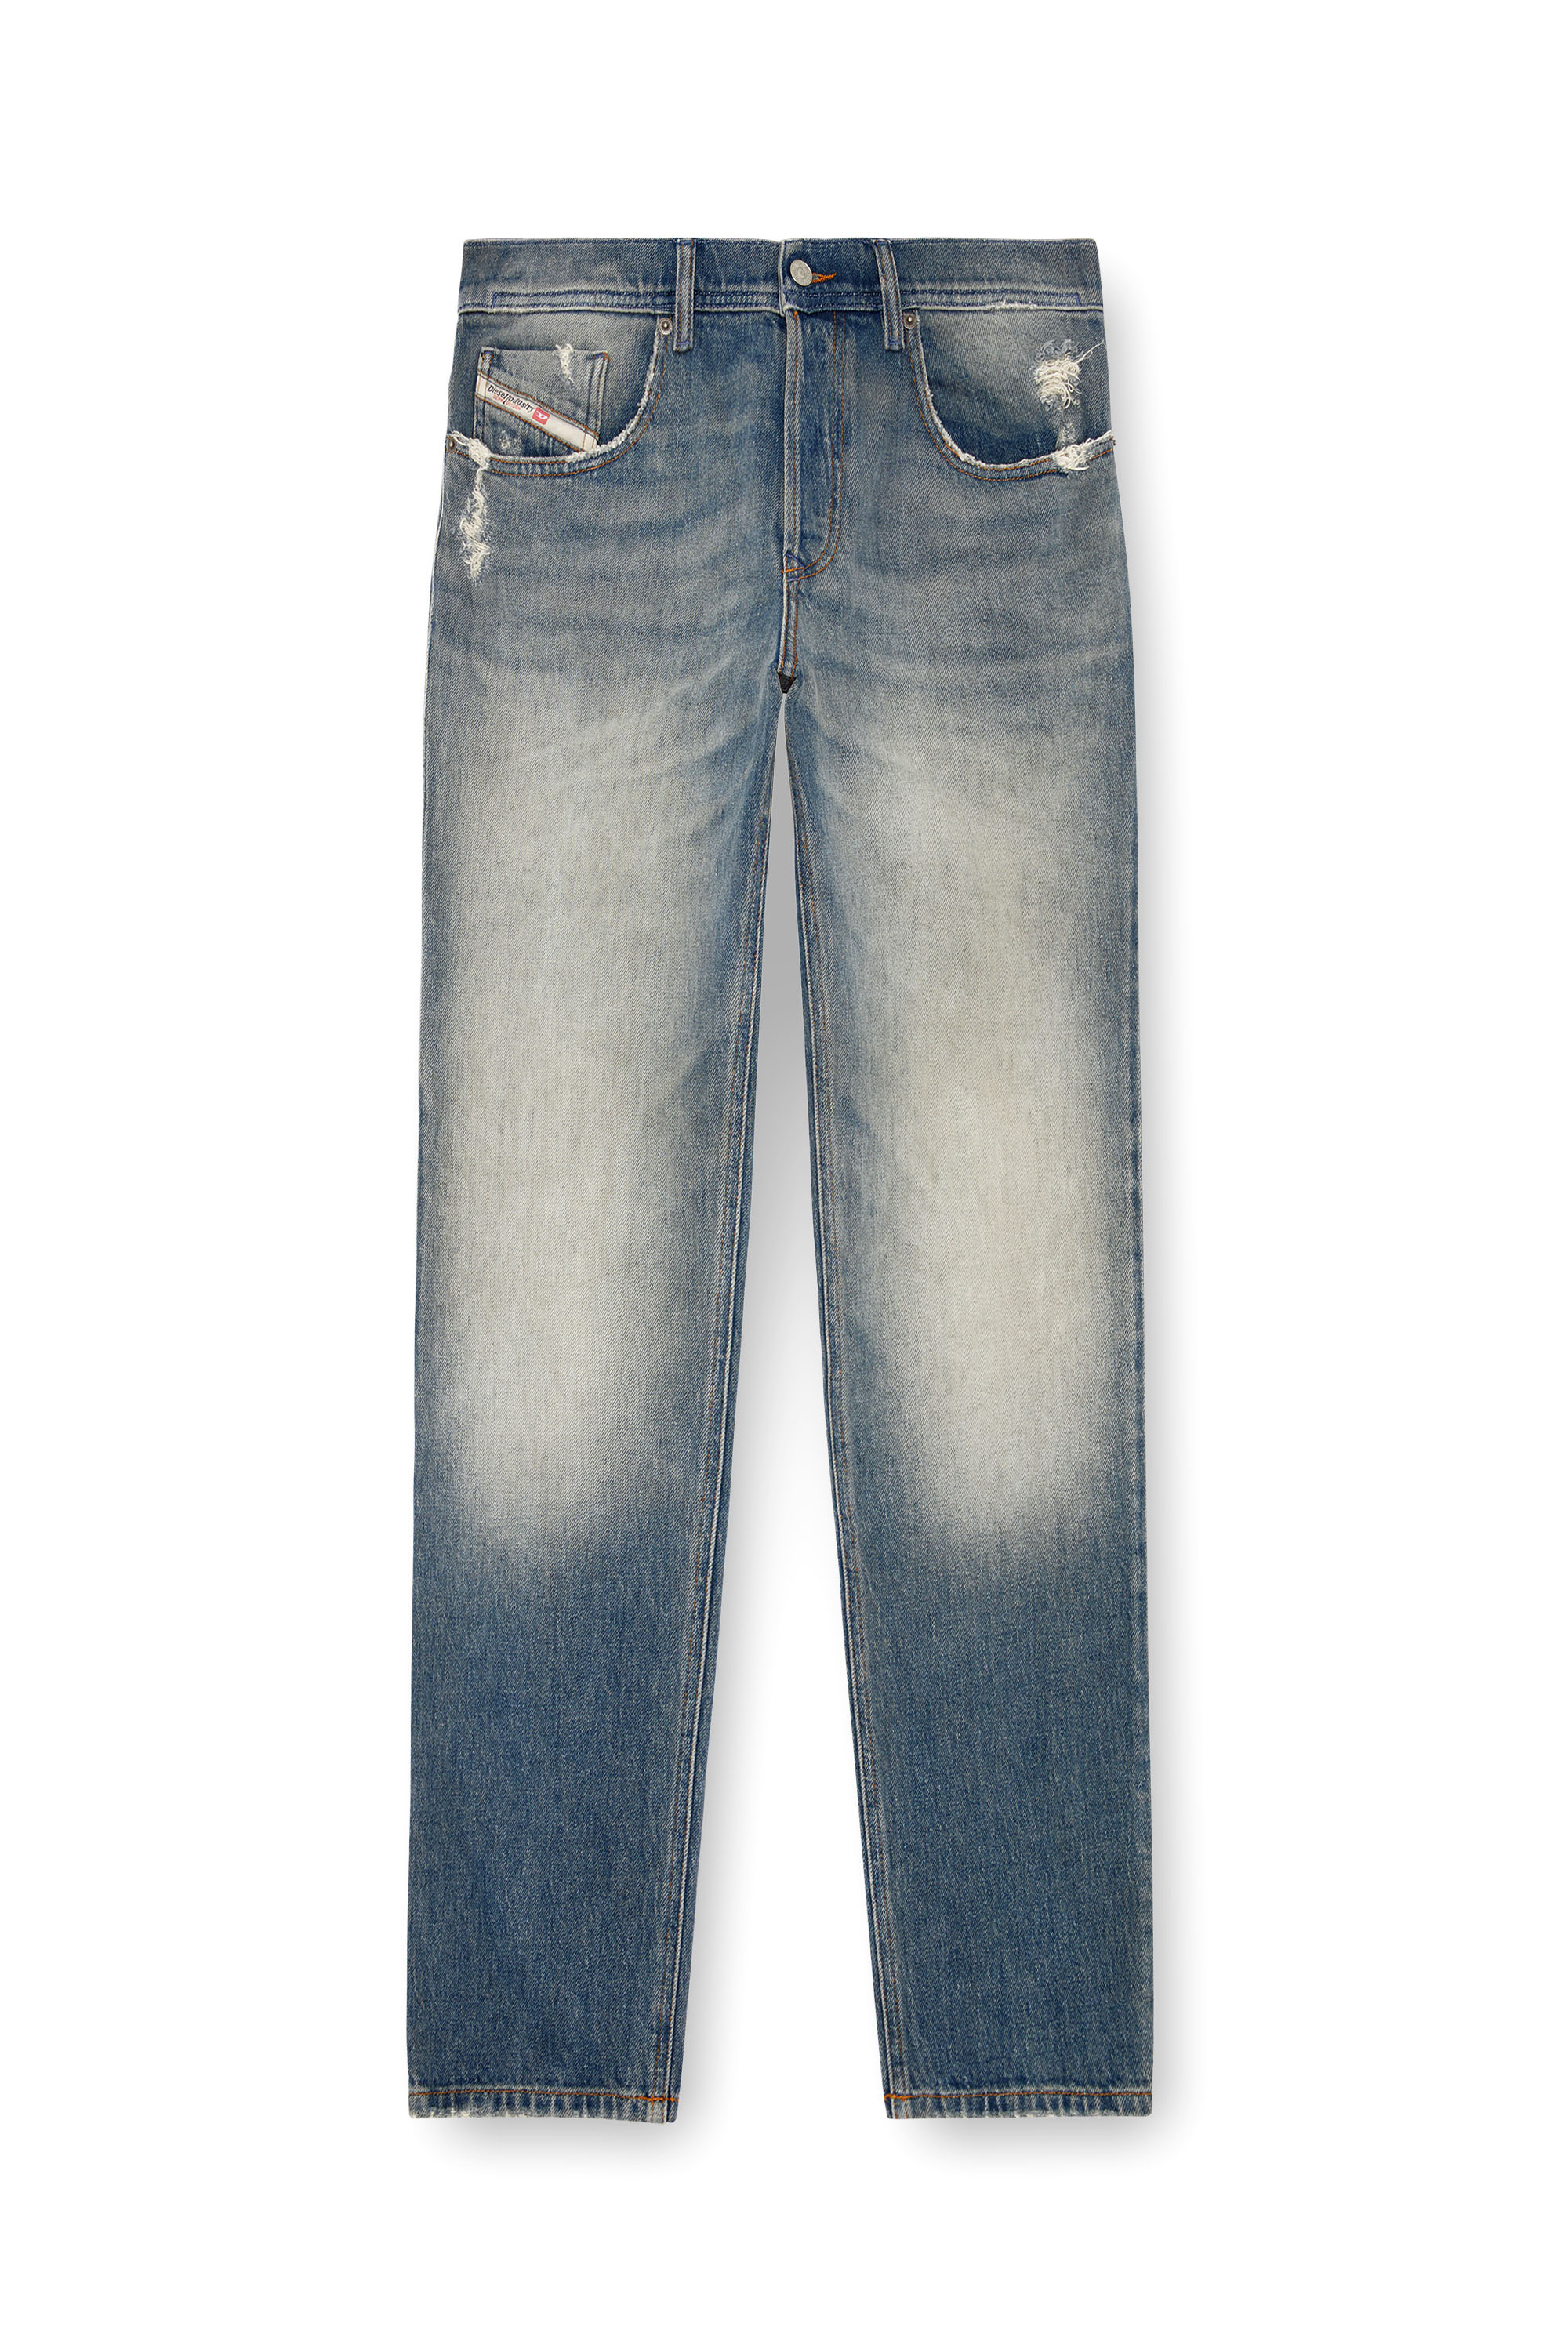 Diesel - Tapered Jeans 2023 D-Finitive 0GRDC, Hombre Tapered Jeans - 2023 D-Finitive in Azul marino - Image 3